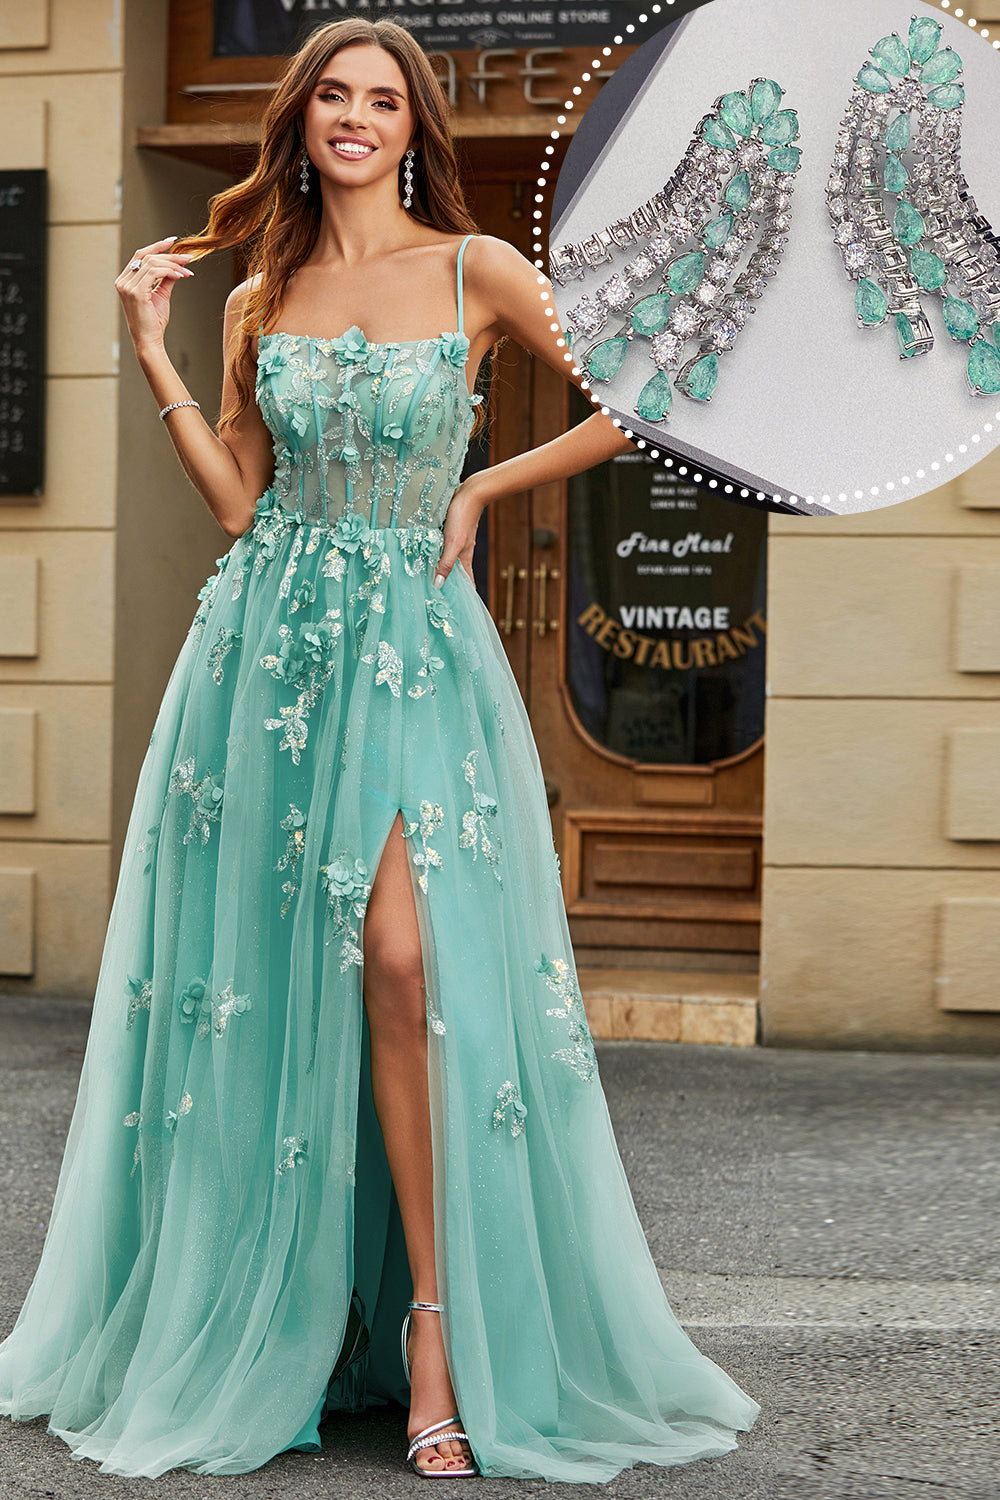 A-Line Green Tulle Corset Applique Long Formal Dress With Accessories Set